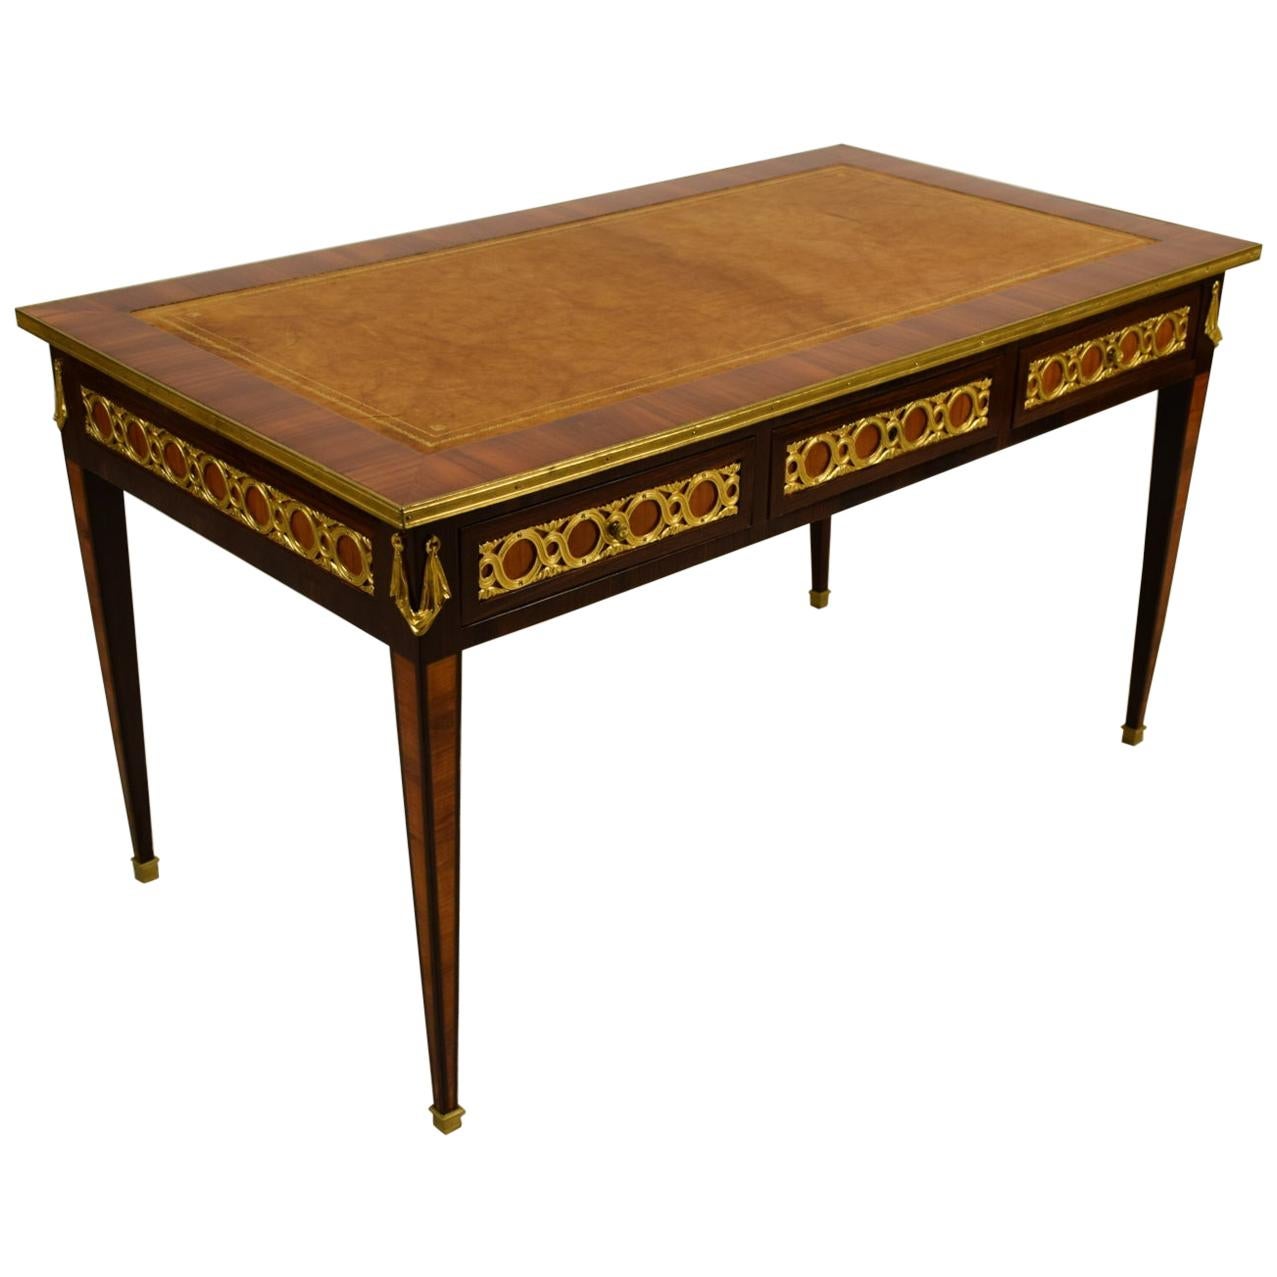 19th Century French Wood Desk Table with Golden Bronzes